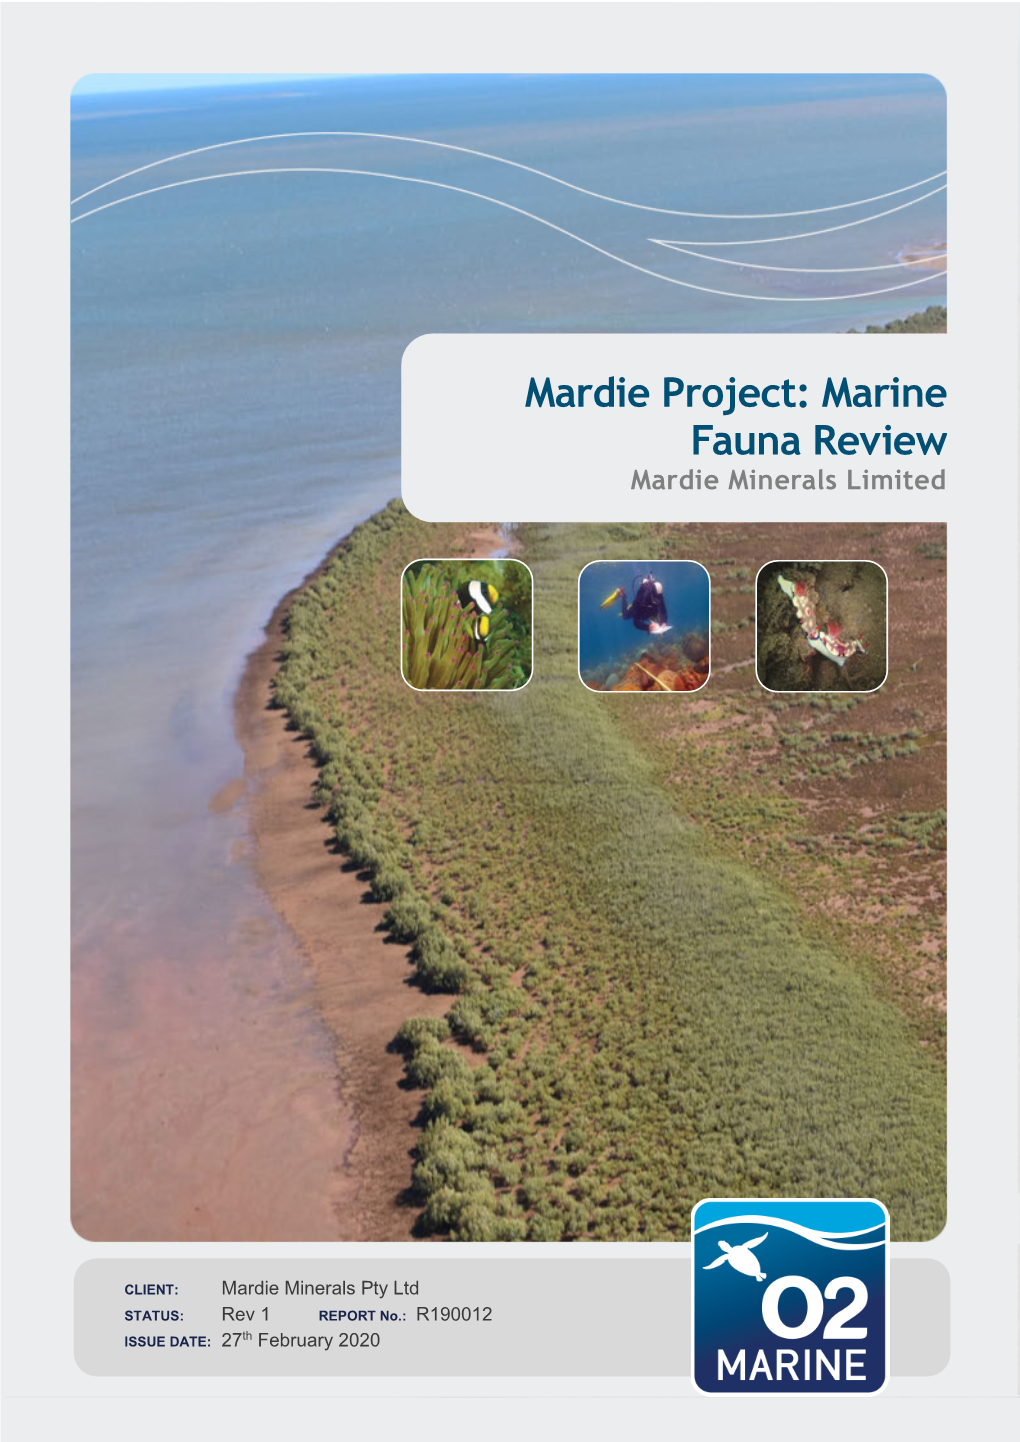 Mardie Project: Marine Fauna Review Mardie Minerals Limited